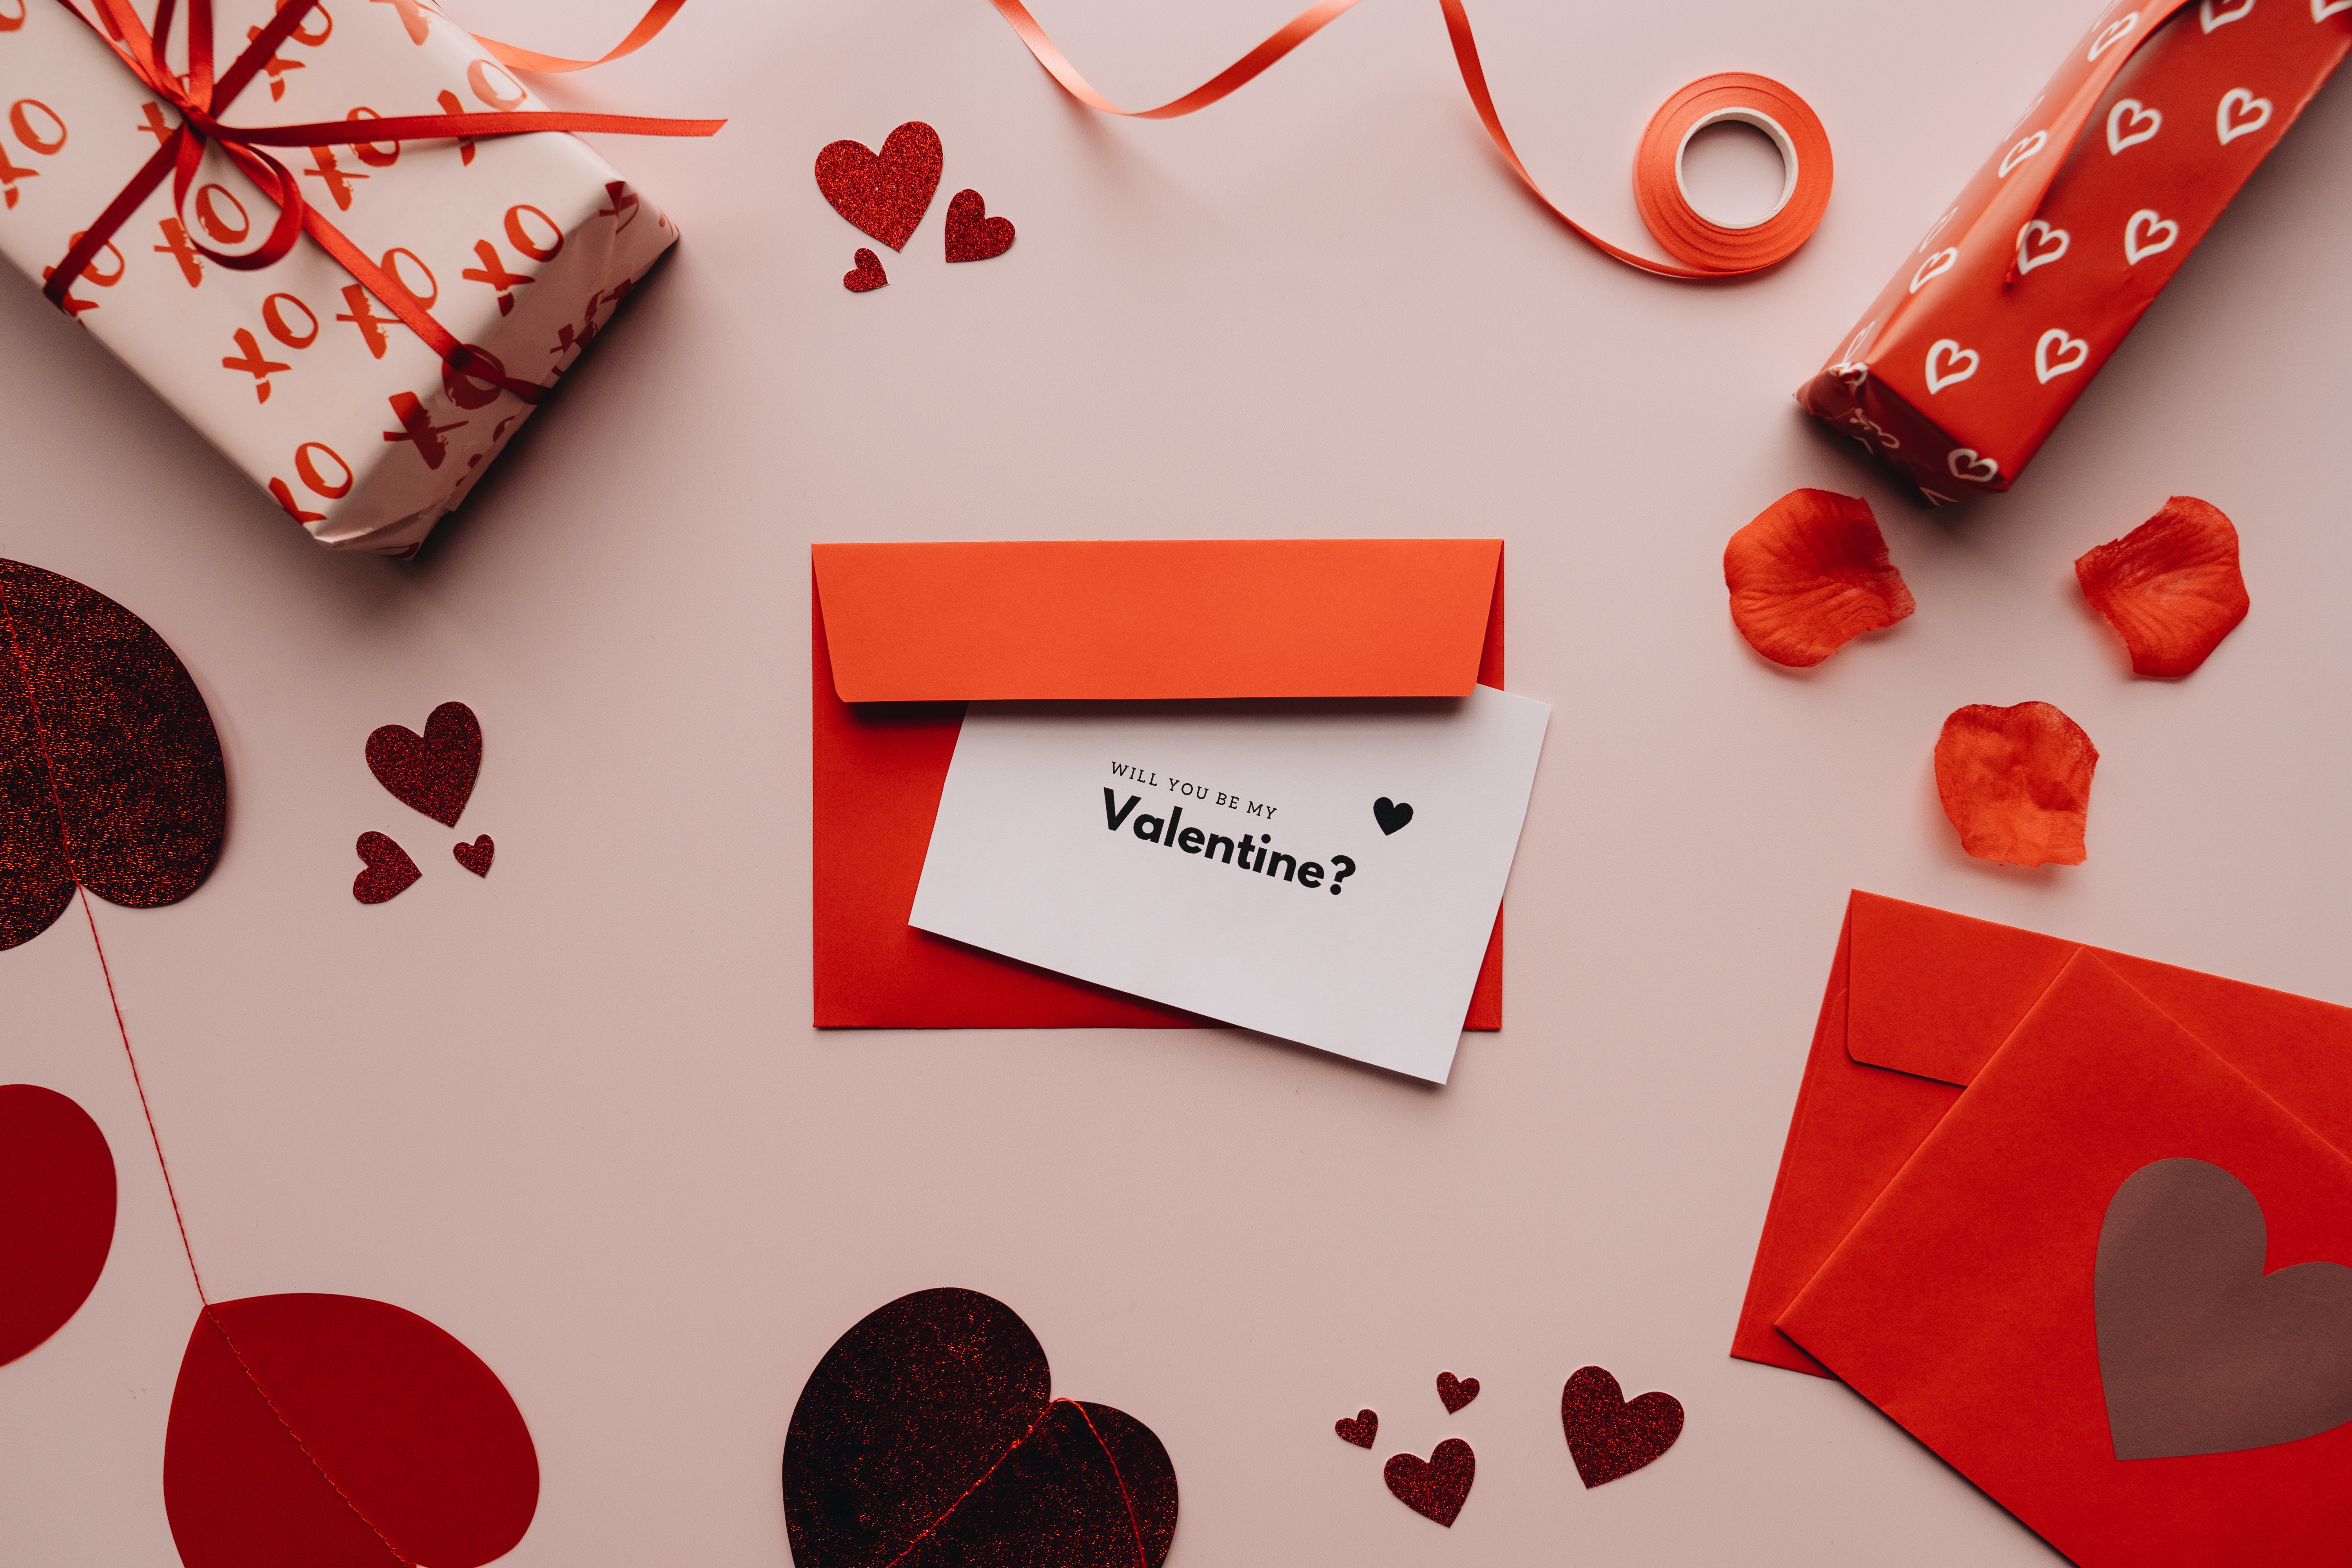 4 Cute Valentine's Day Card Ideas you can Make Online – remove.bg Blog